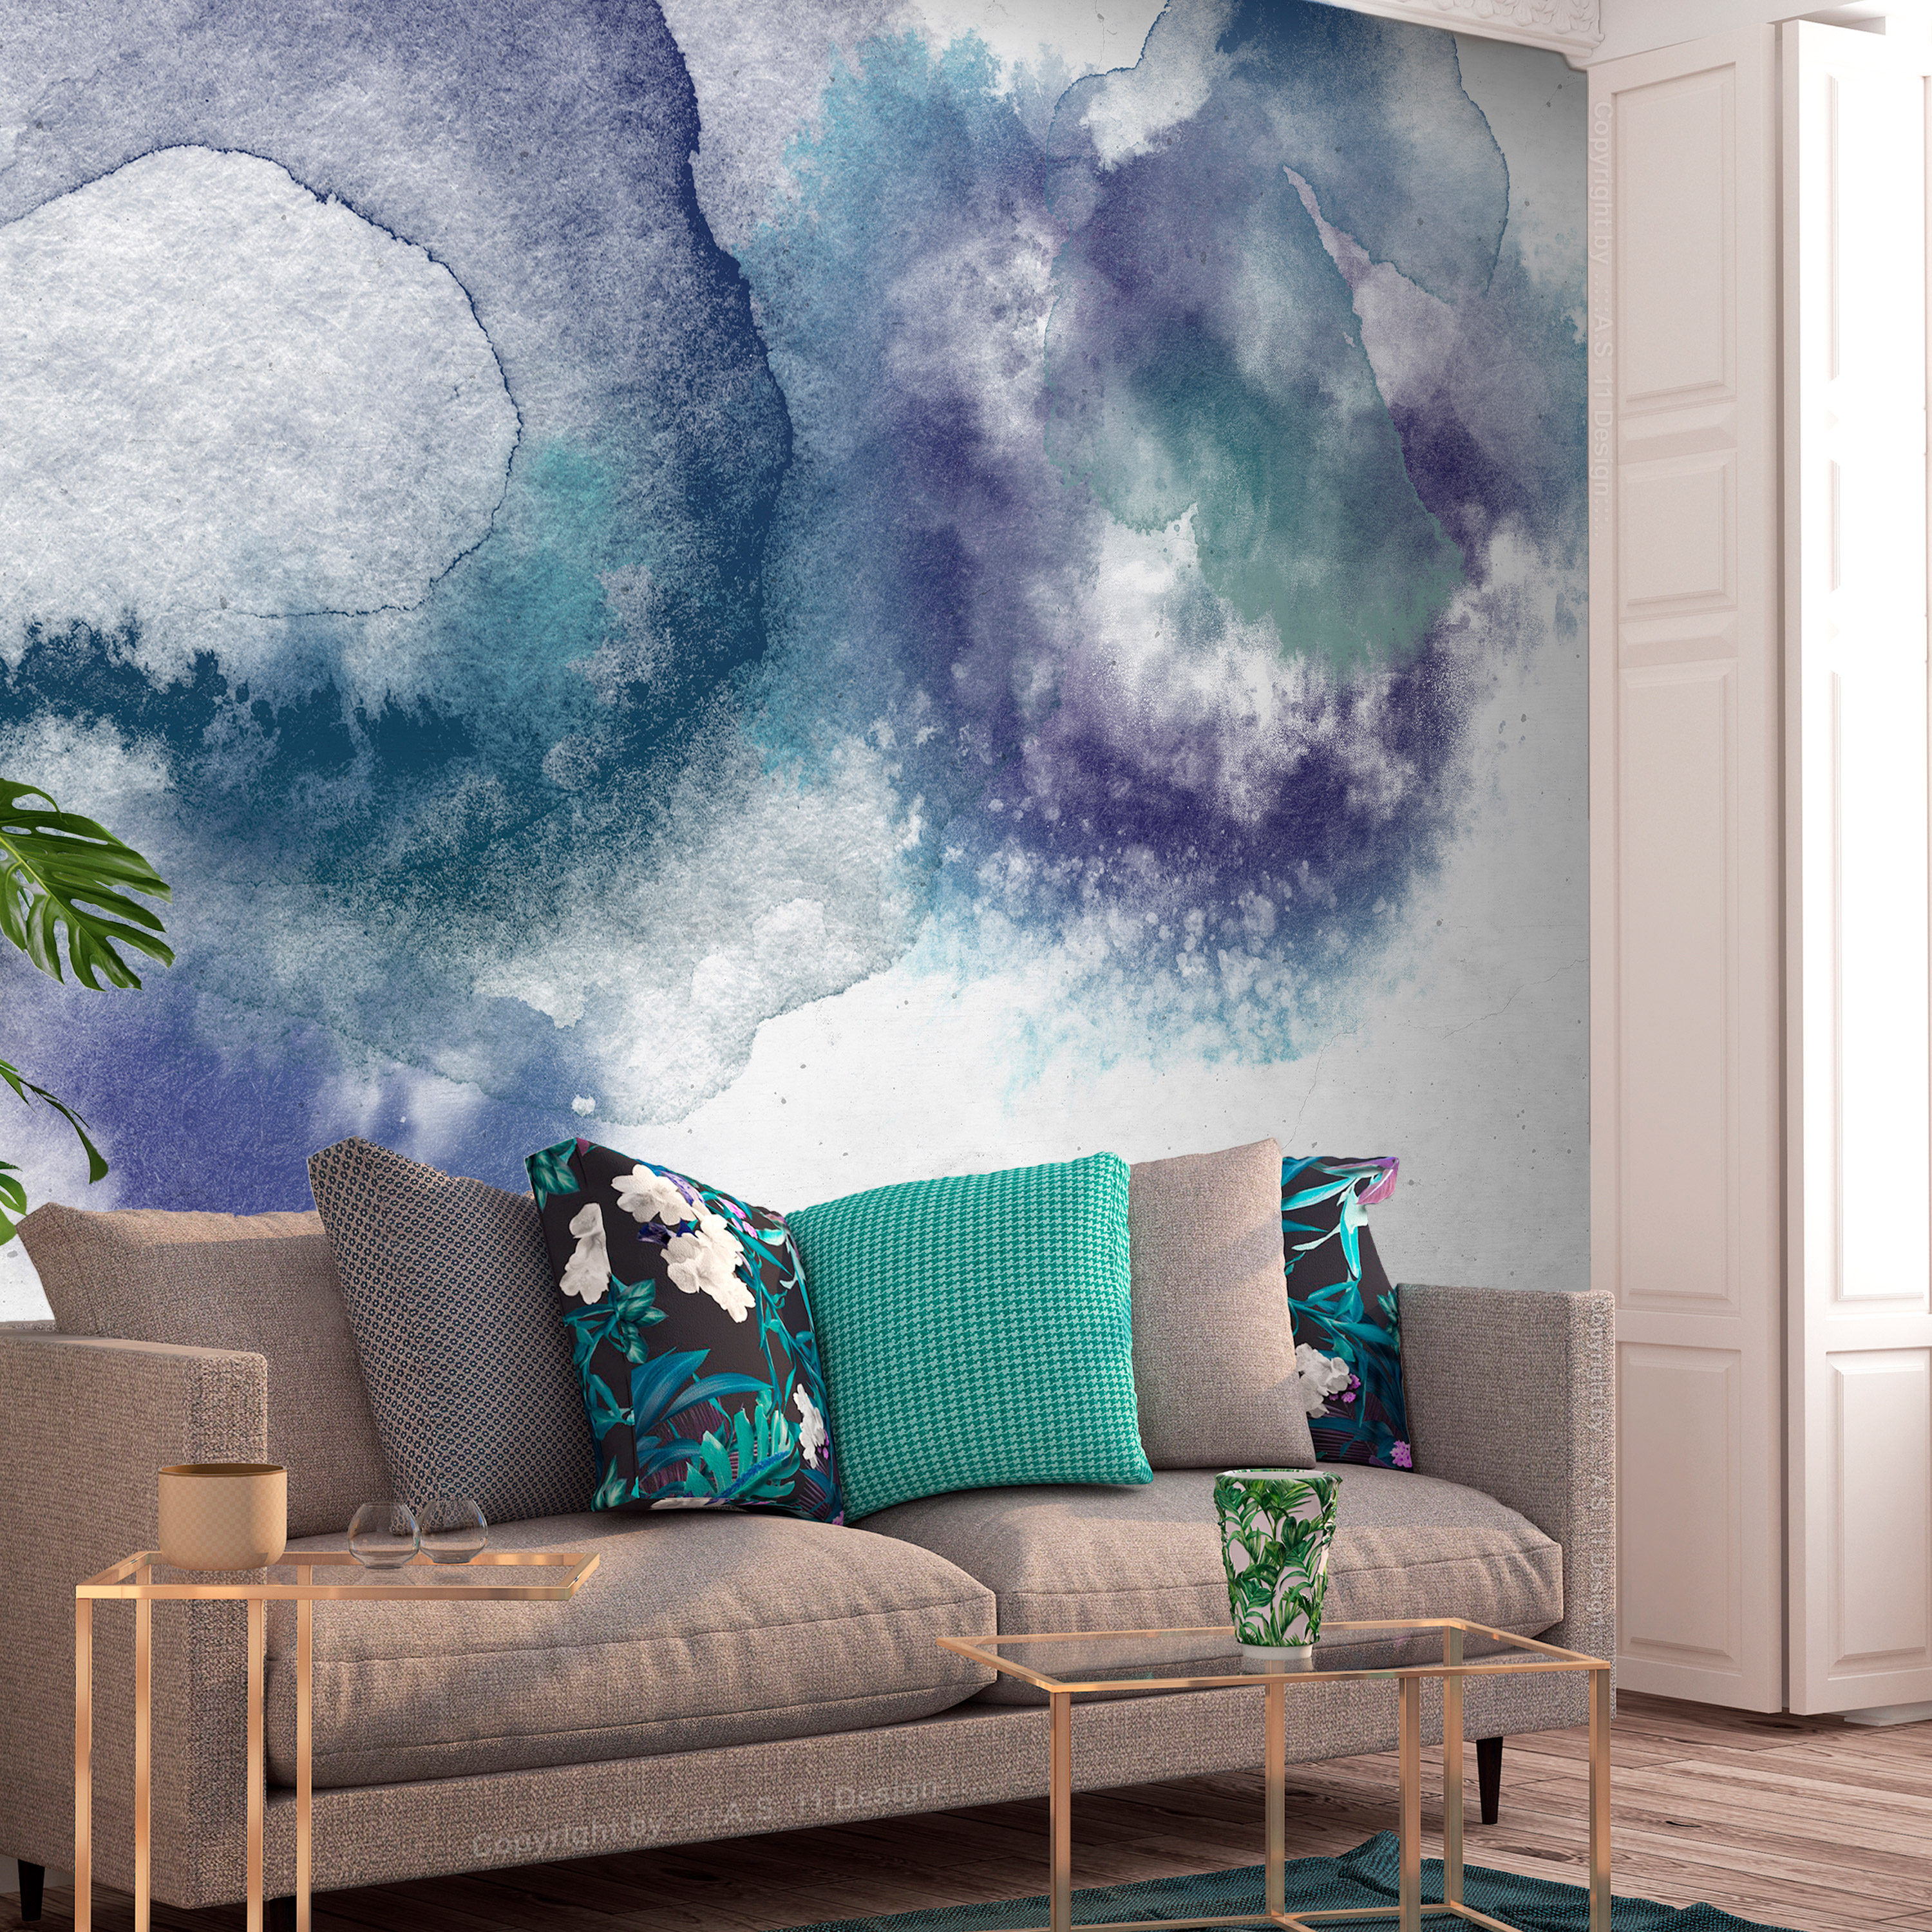 Self-adhesive Wallpaper - Painted Mirages - Second Variant - 294x210